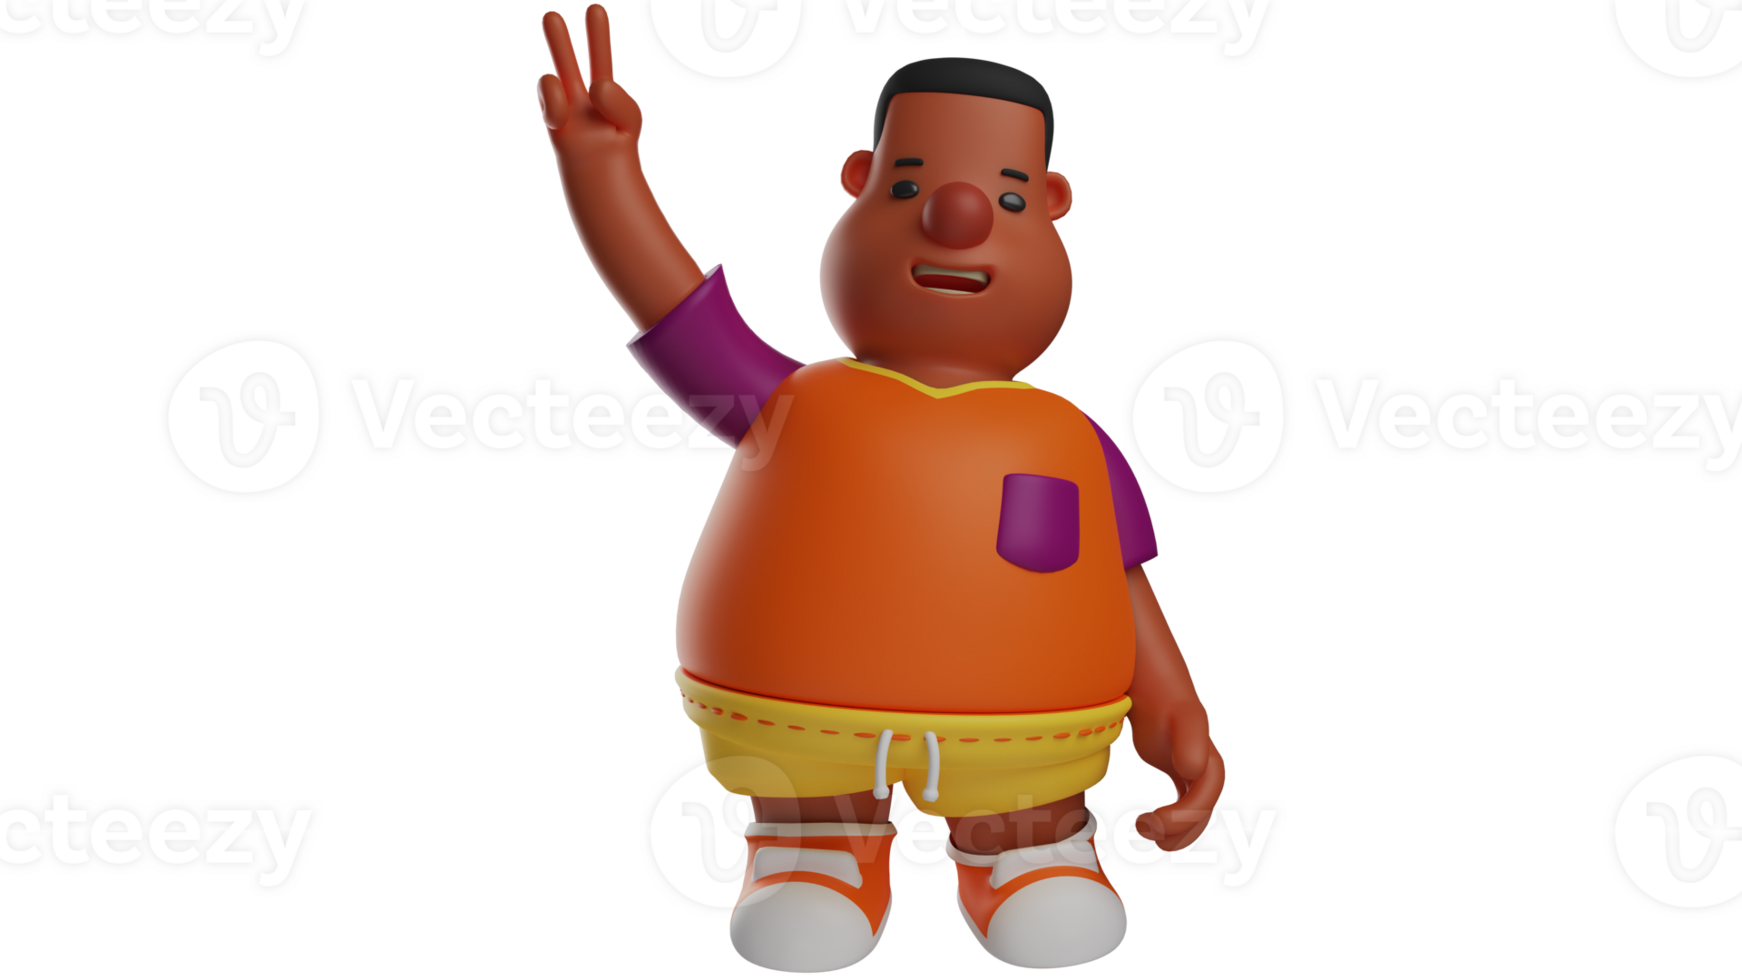 3D illustration. Adorable Fat Boy 3D Cartoon Character. Fat boy standing and showing peace pose using his fingers. Cute fat student smiling sweetly facing forward. 3D cartoon character png